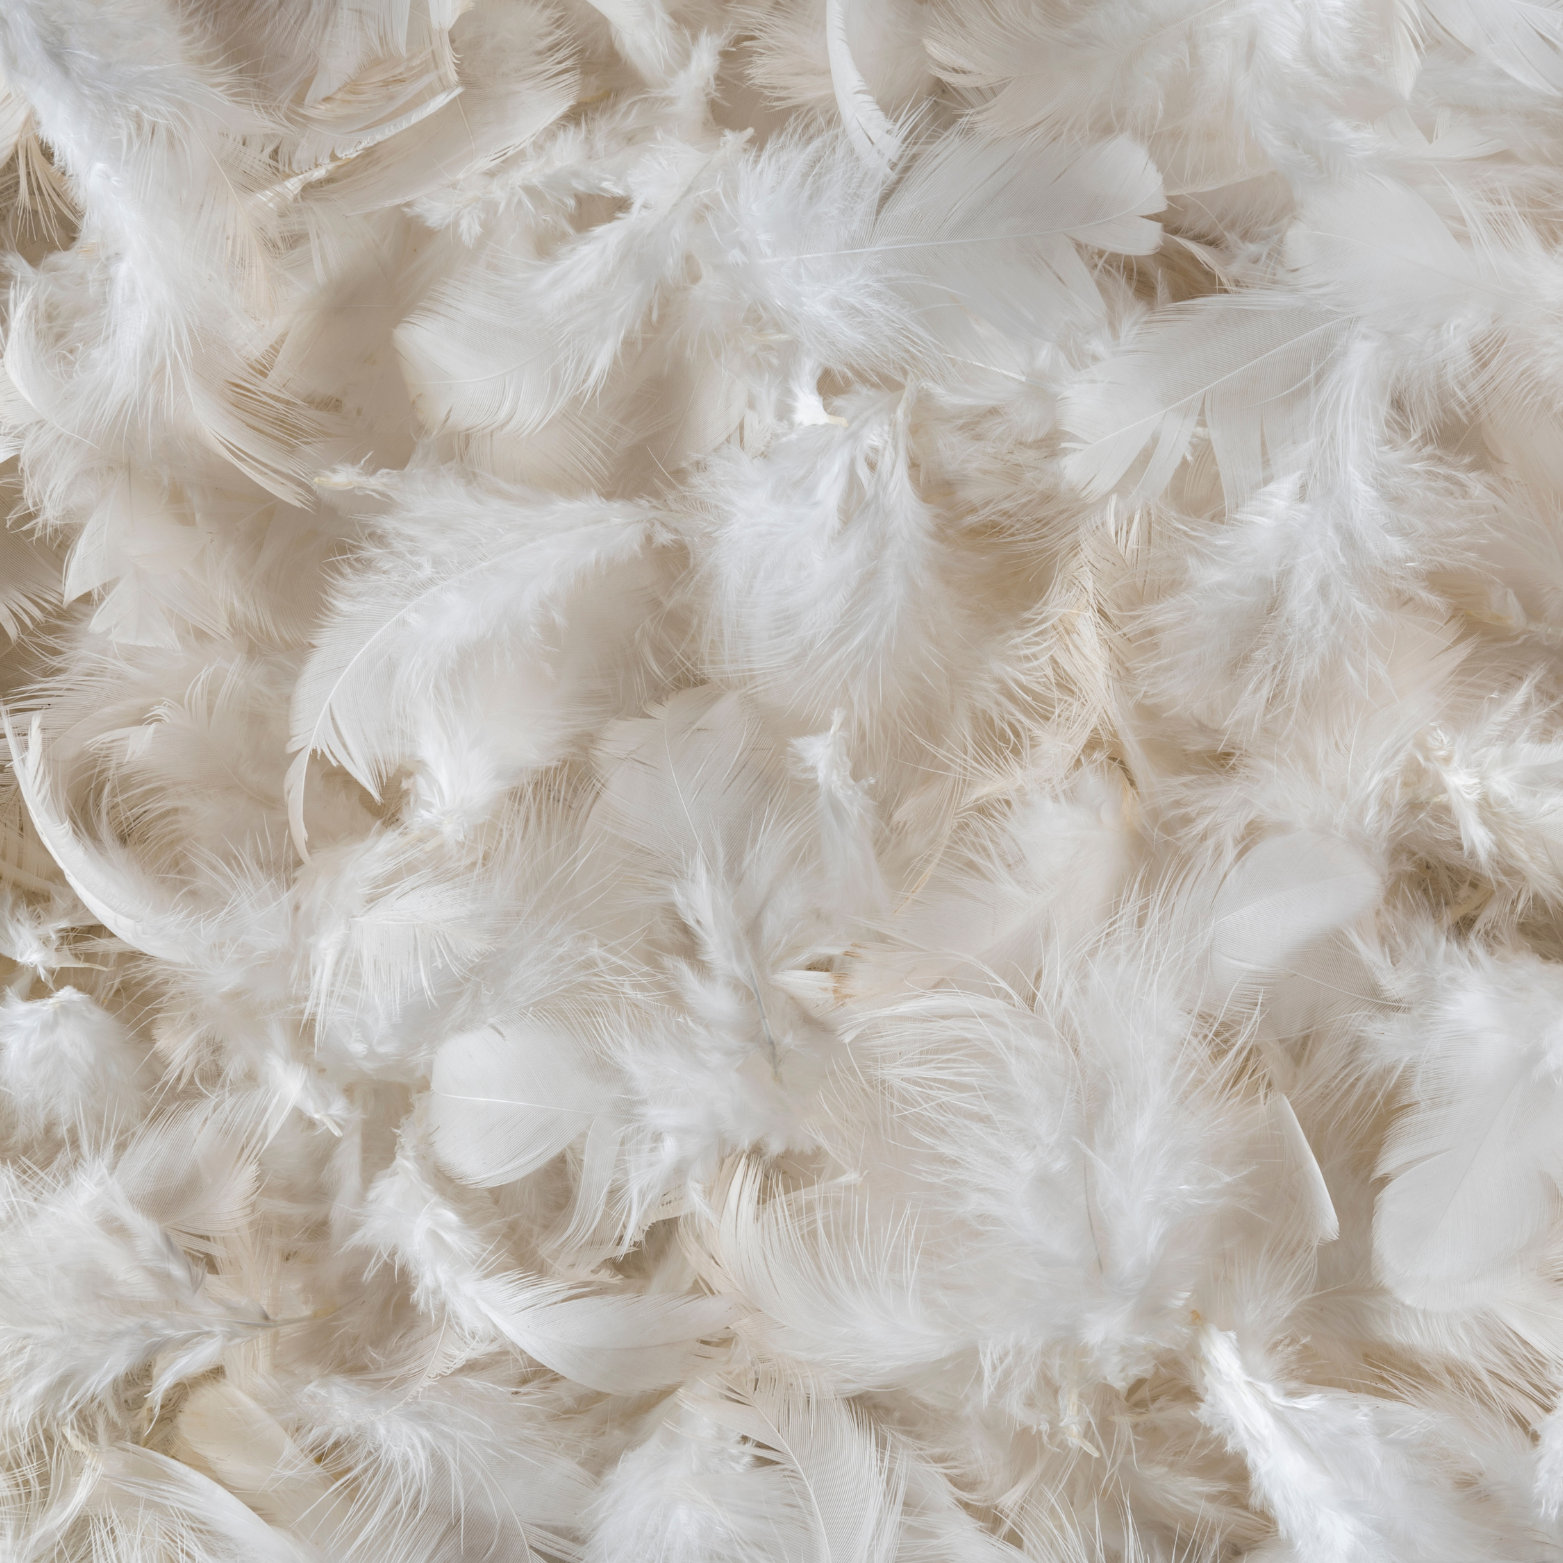 ROSE FEATHER Bulk Goose Down Feather Stuffing & Fill